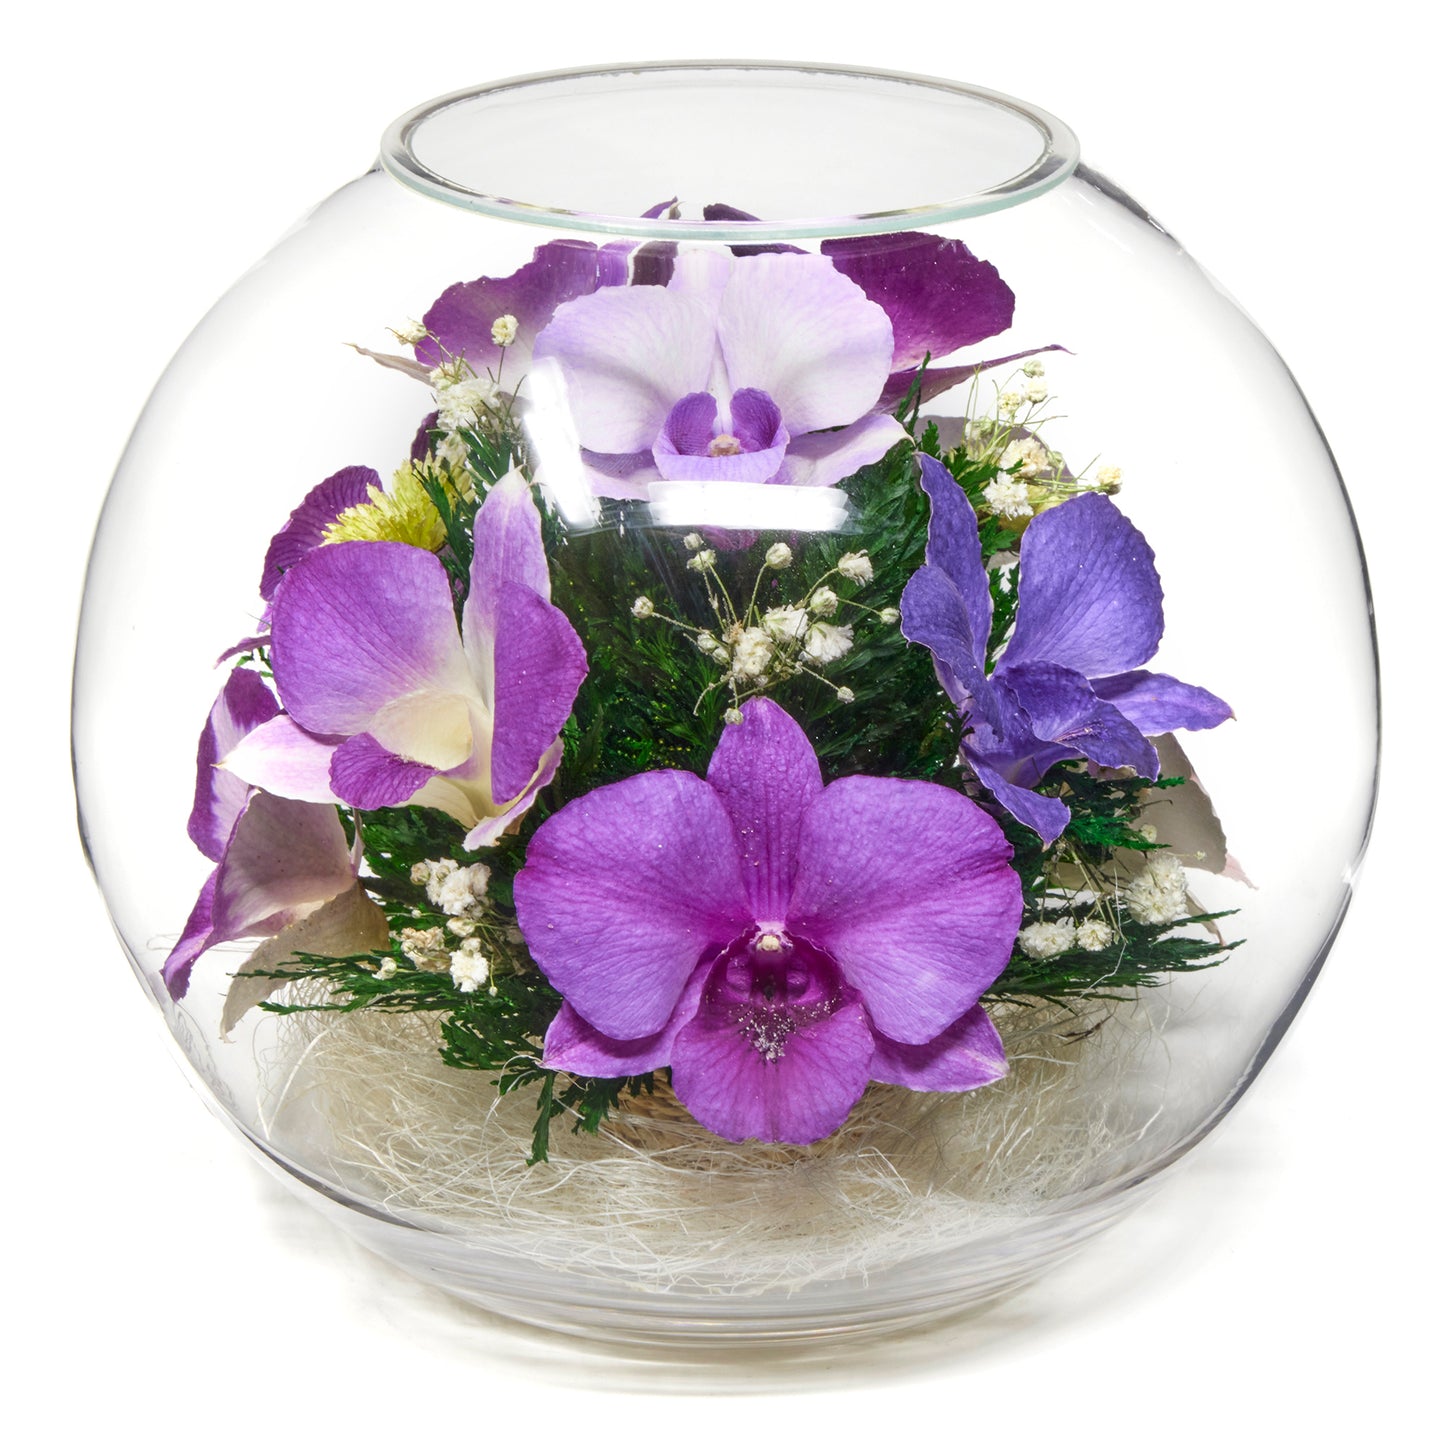 In Flores Veritas: Orchid Spectrum Bowl - Lasts up to 5 Years - Elegant Gift for Any Occasion